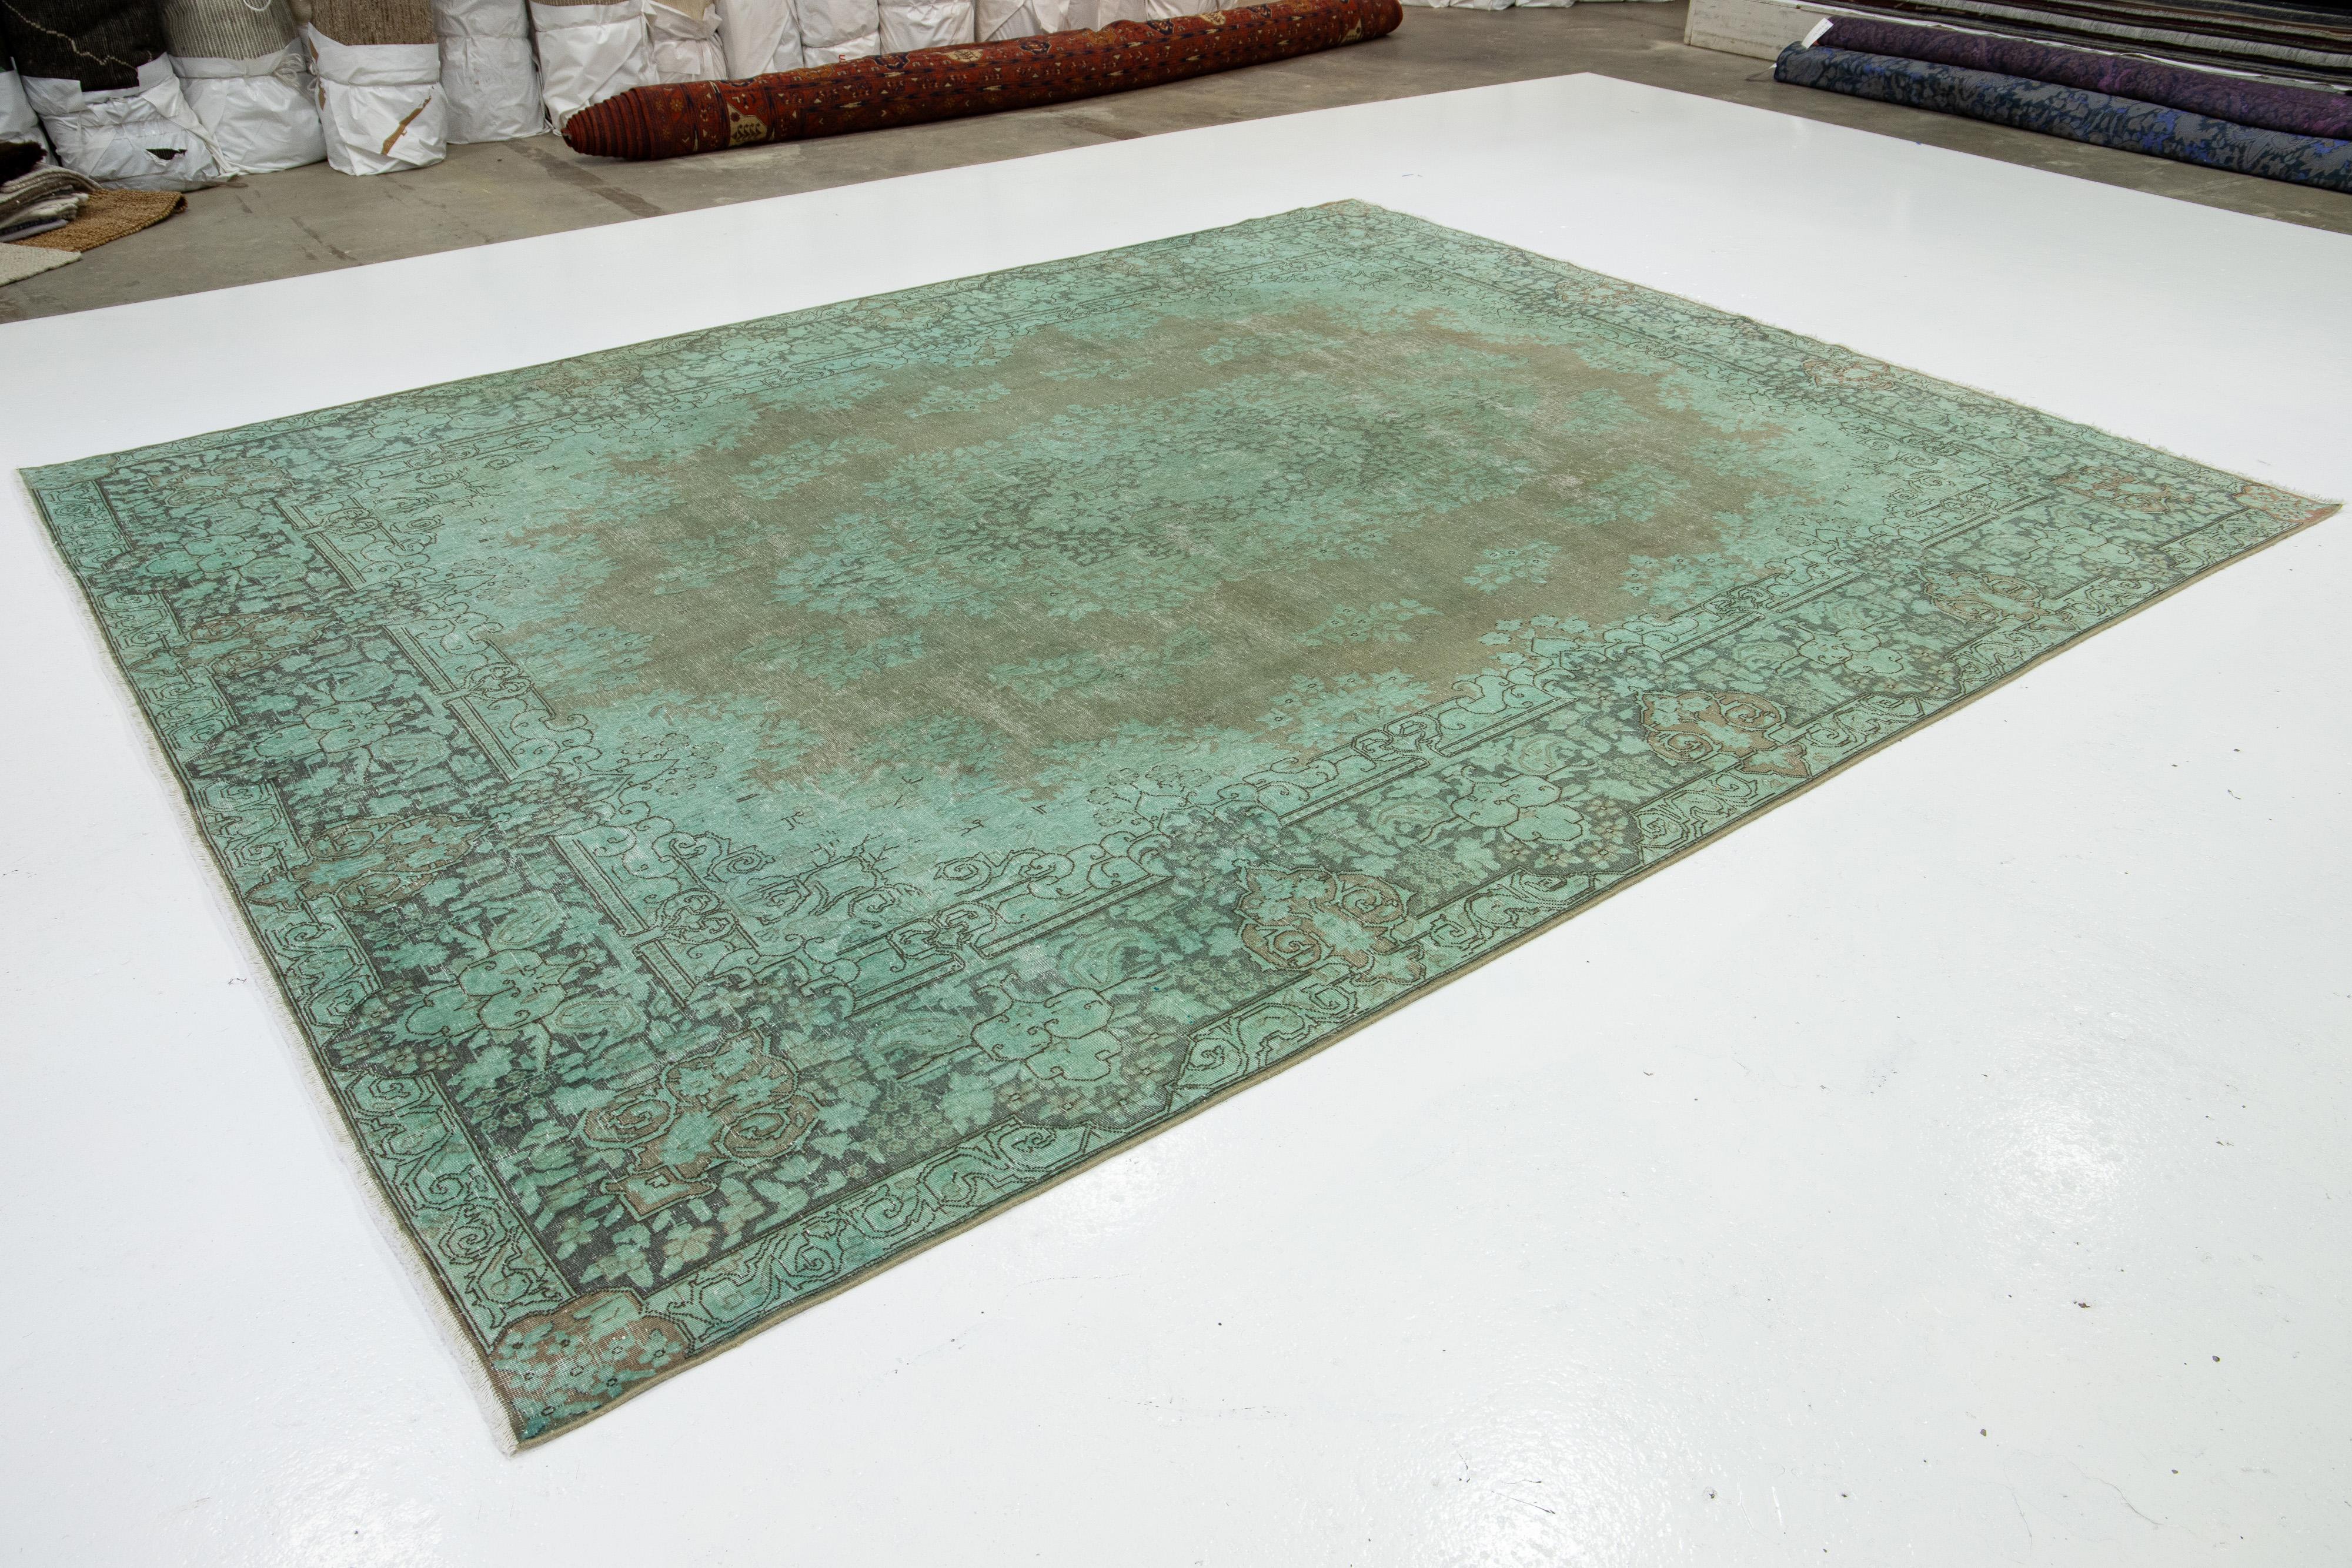 Green Floral Antique Persian Overdyed Wool Rug 10 x 13 In Good Condition For Sale In Norwalk, CT